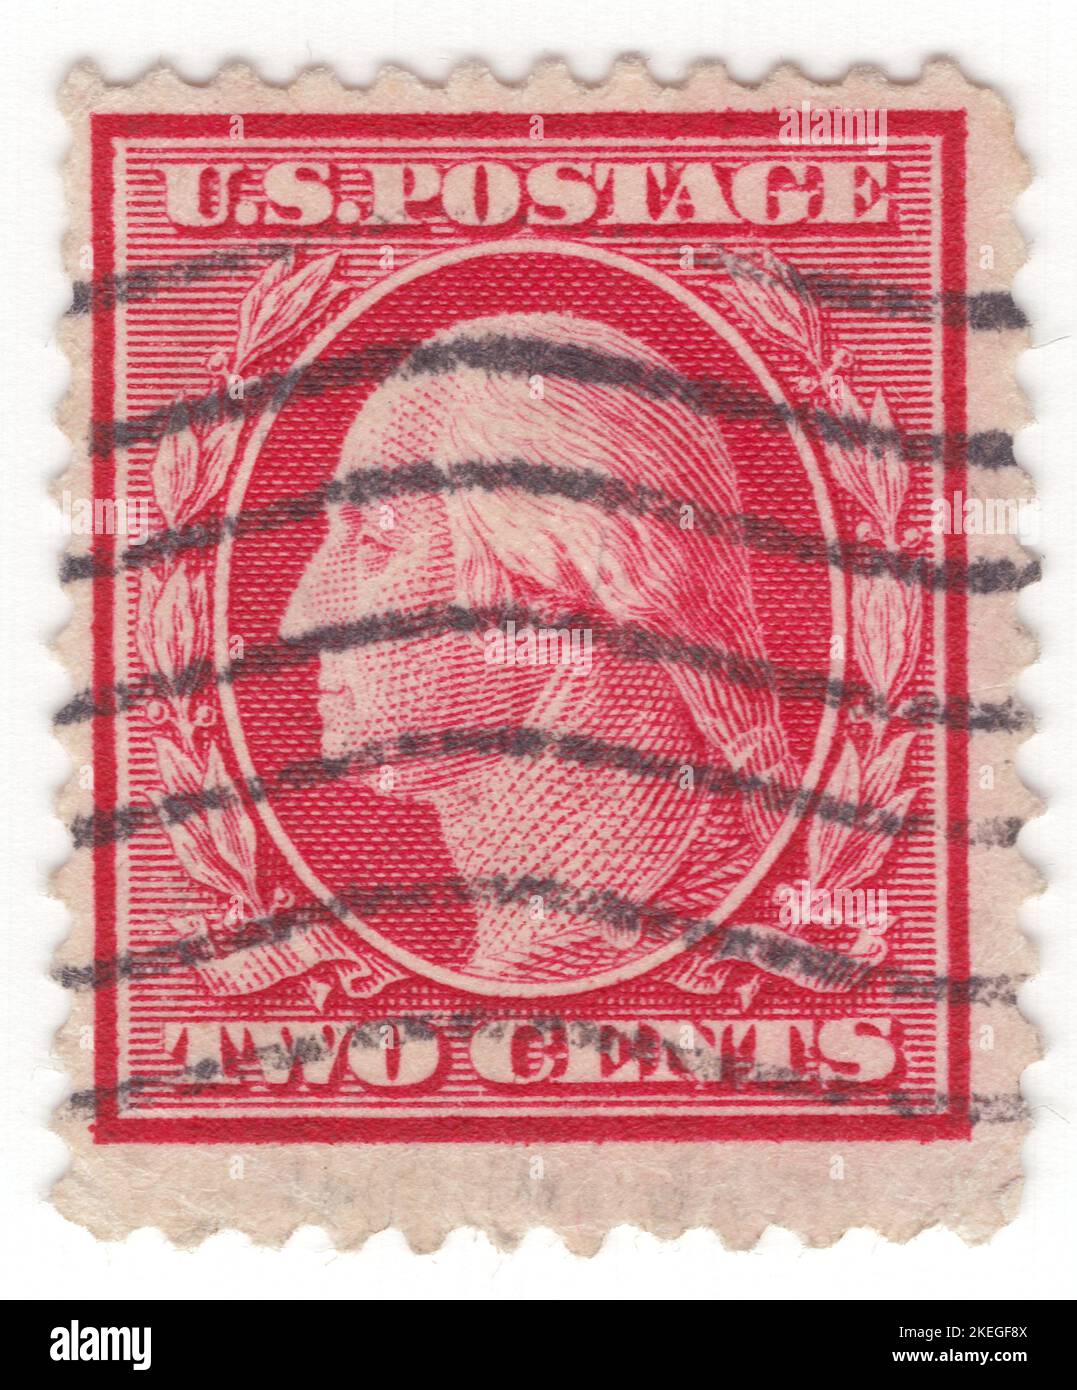 USA - 1910: An 2 cents carmine postage stamp depicting portrait of George Washington. American military officer, statesman, and Founding Father who served as the first president of the United States from 1789 to 1797. Appointed by the Continental Congress as commander of the Continental Army, Washington led the Patriot forces to victory in the American Revolutionary War and served as the president of the Constitutional Convention of 1787, which created the Constitution of the United States and the American federal government. Washington has been called the 'Father of his Country' Stock Photo